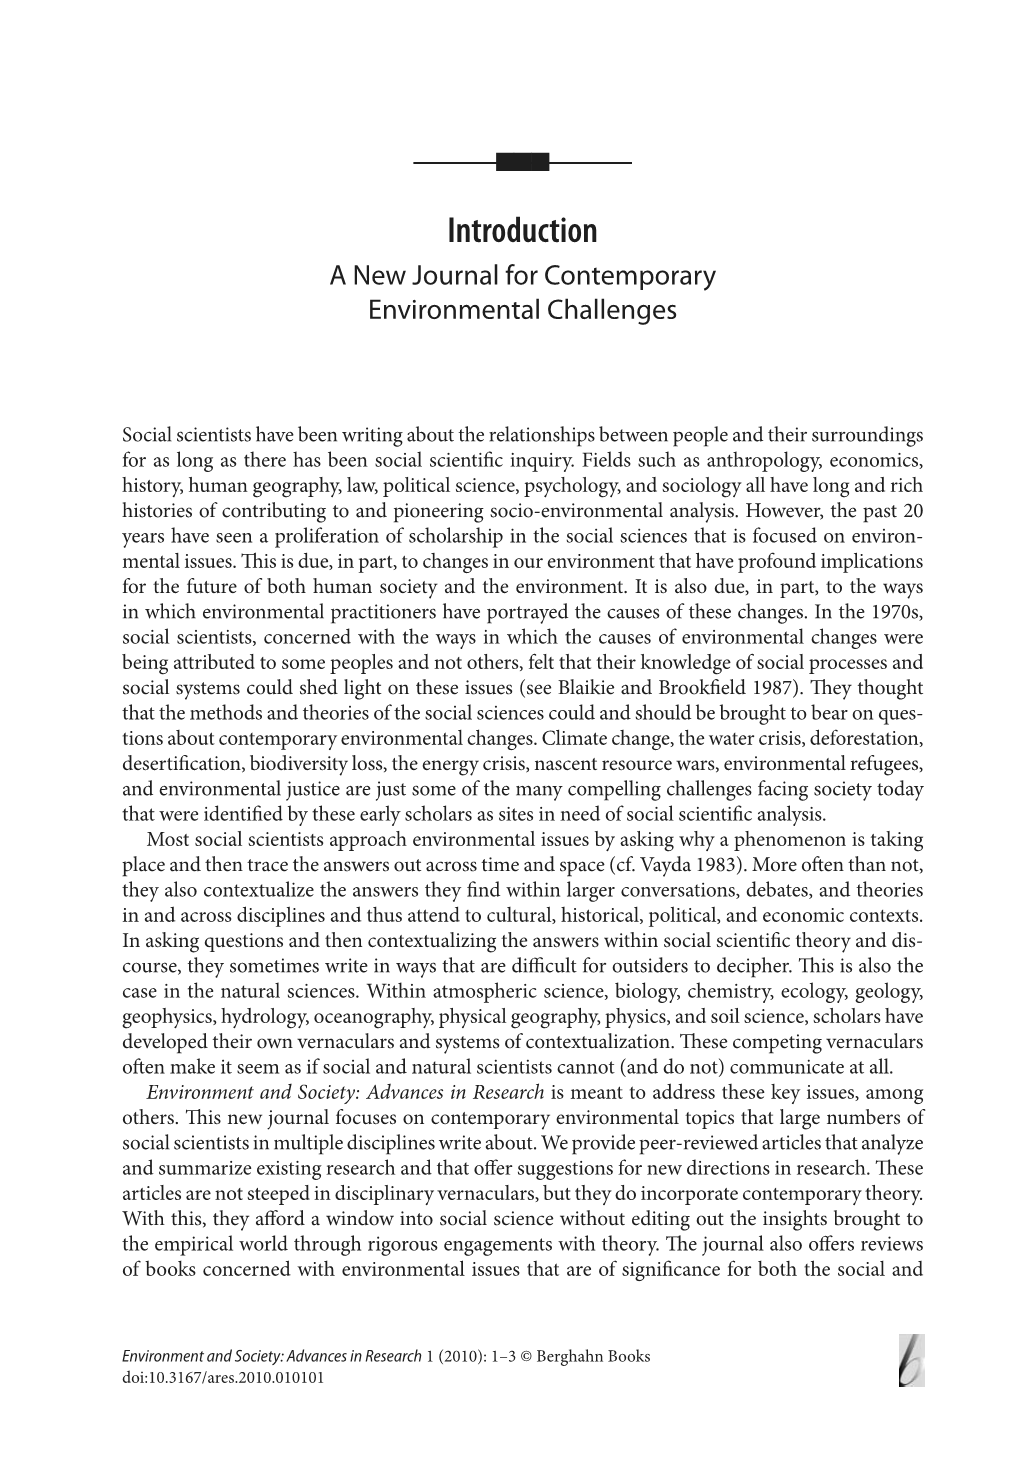 Nnn Introduction a New Journal for Contemporary Environmental Challenges